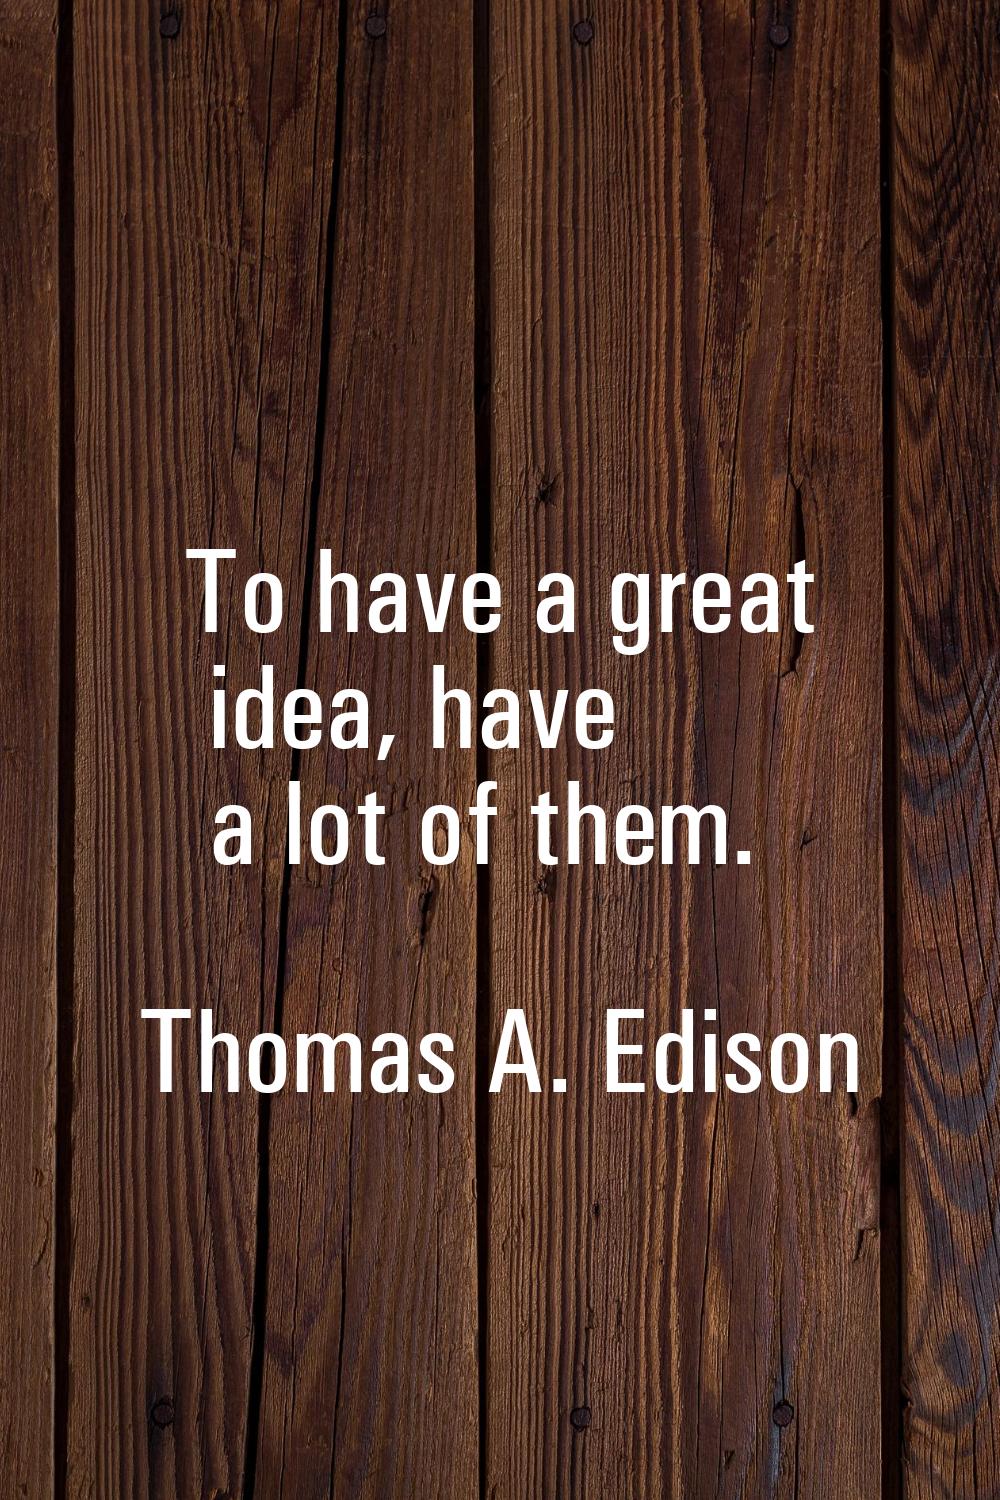 To have a great idea, have a lot of them.